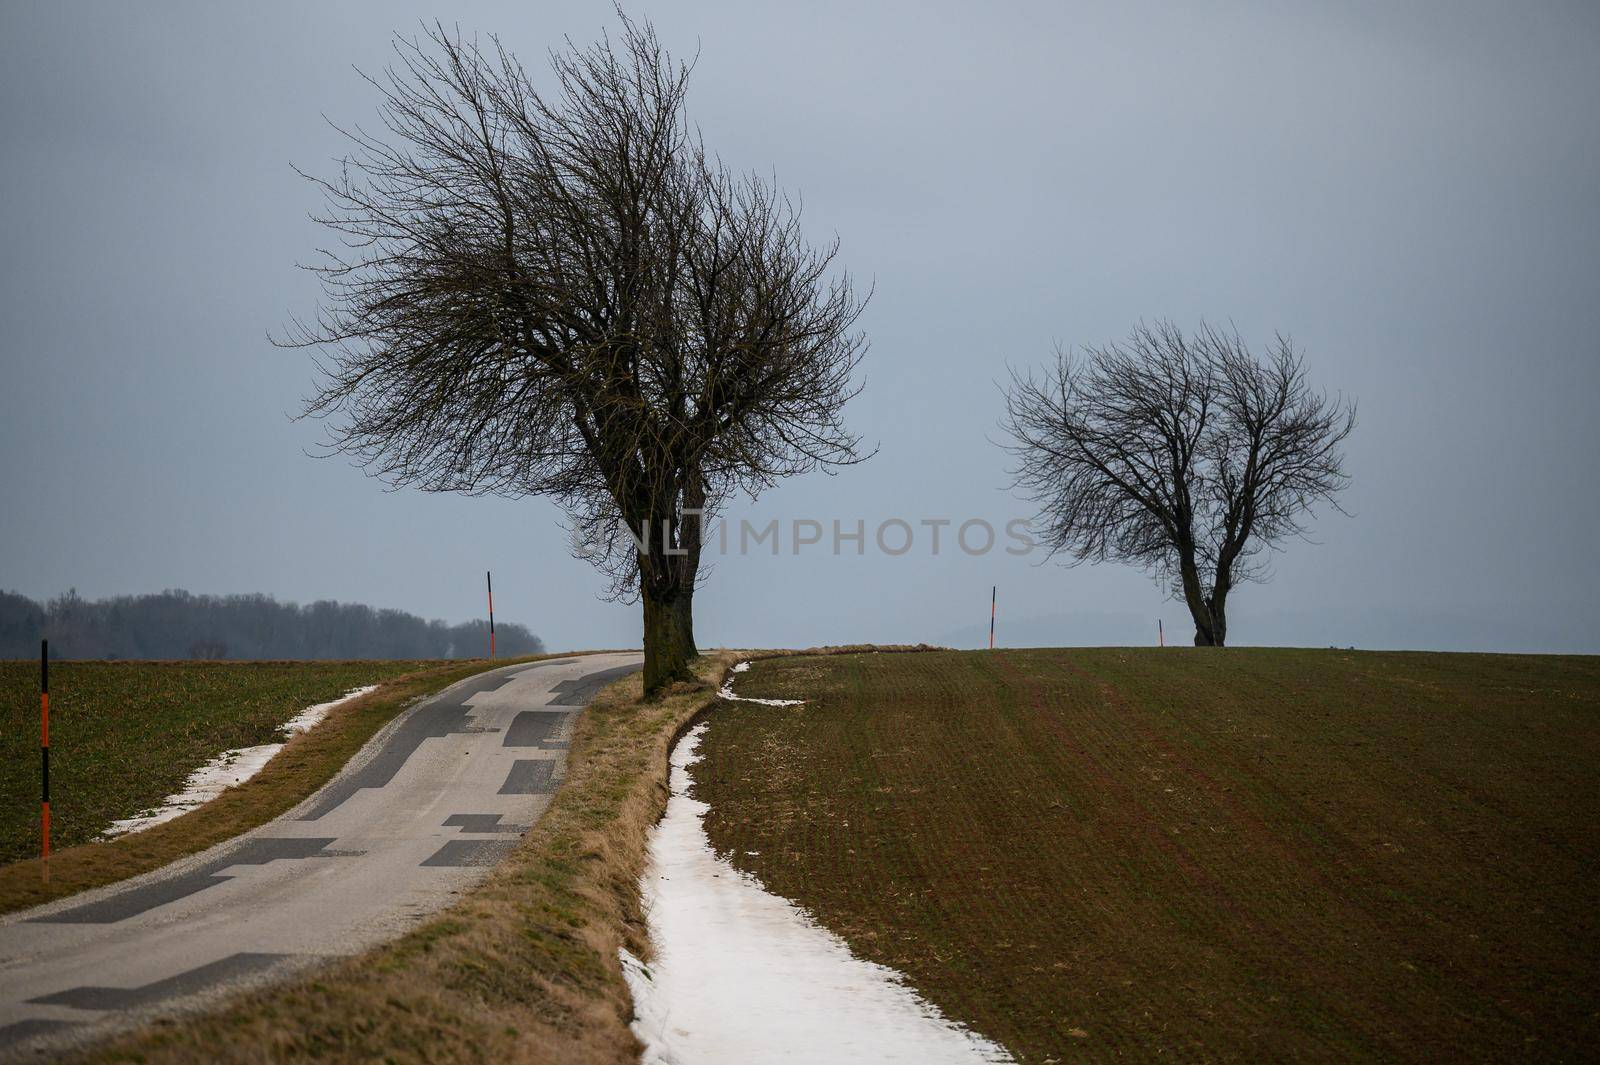 A narrow country road leads through a bare landscape with few trees and a little snow on the roadside.